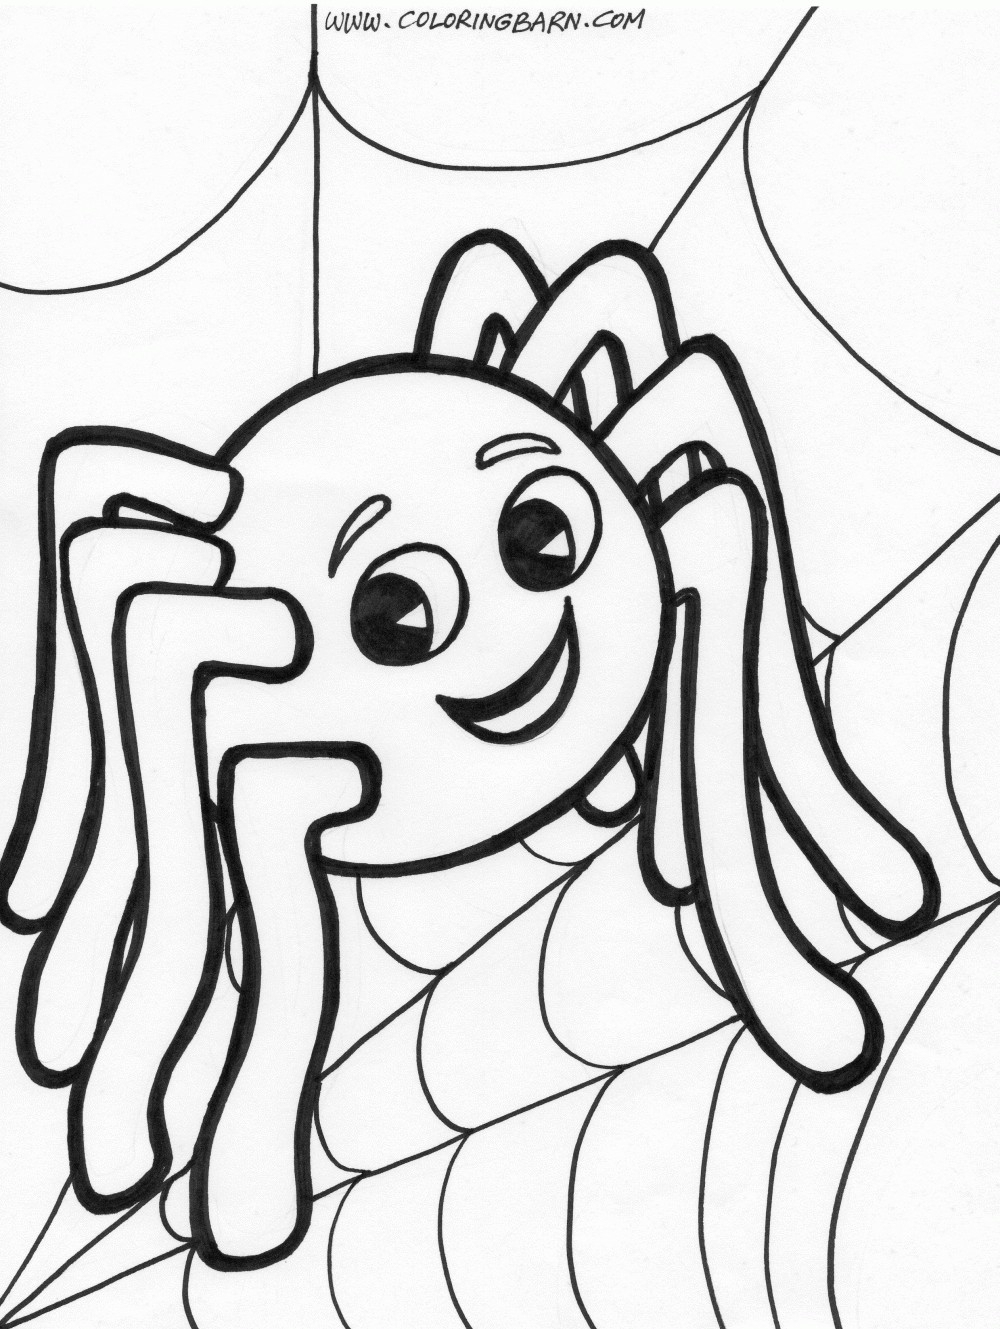 Coloring Pages ~ Exploit Free Printable Coloring Pages For Toddlers - Free Printable Coloring Pages For Toddlers